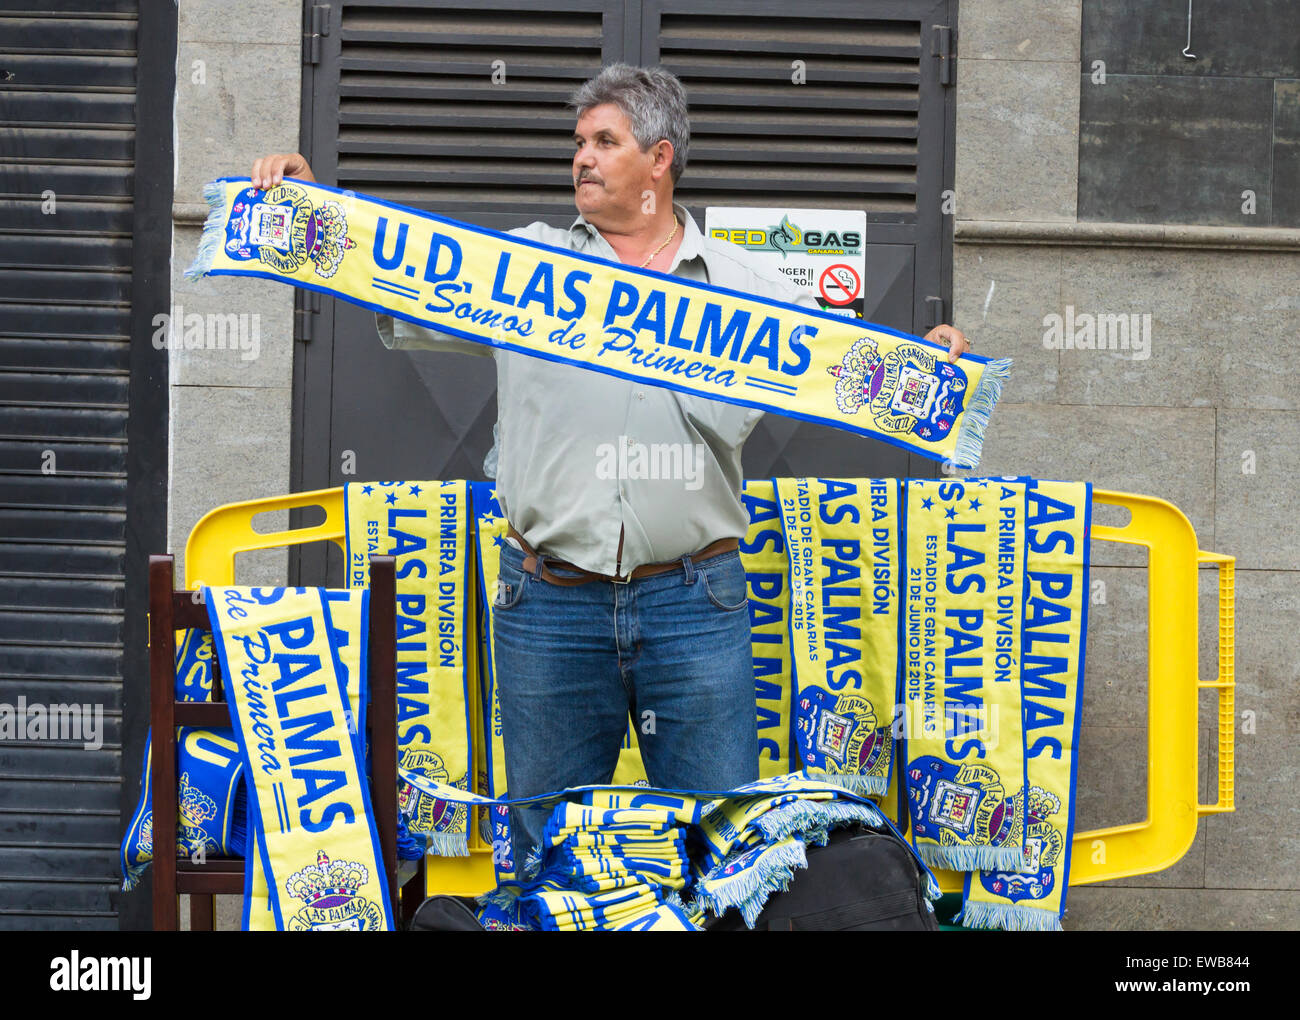 Las Palmas, Gran Canaria, Canary Islands, Spain. 21st June, 2015. Football:  Scarf seller outside stadium on Sunday afternoon as Las Palmas win  promotion in a dramatic second leg play-off game to join